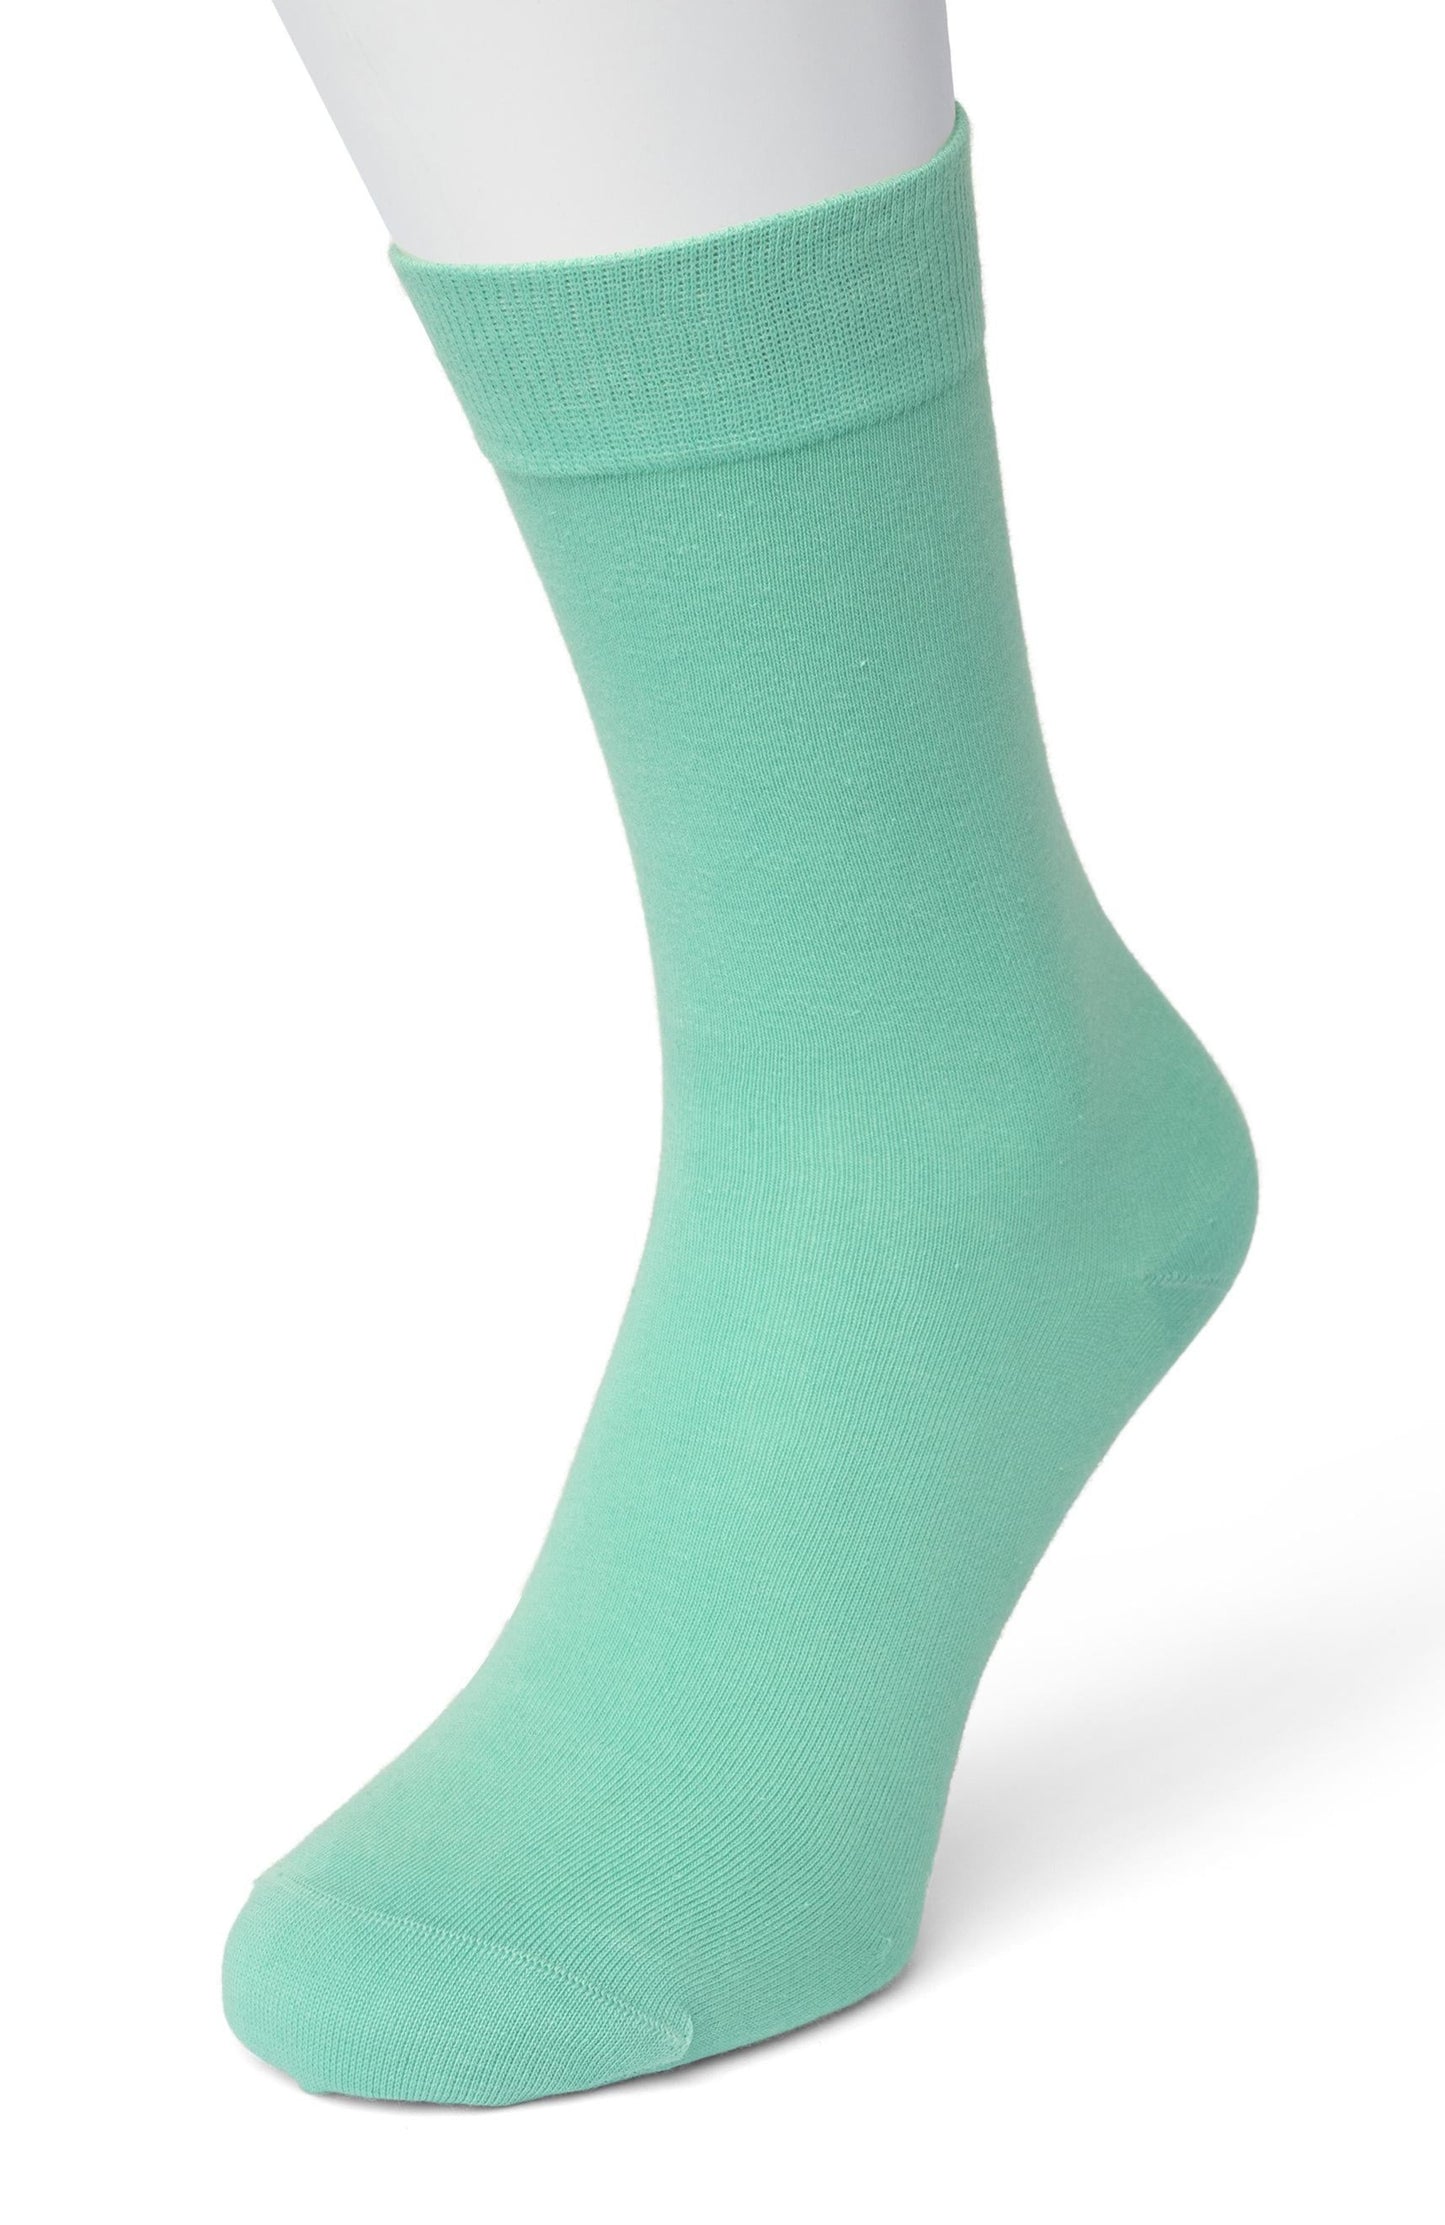 Bonnie Doon 83422 Cotton Sock - Mint green ankle socks available in women sizes